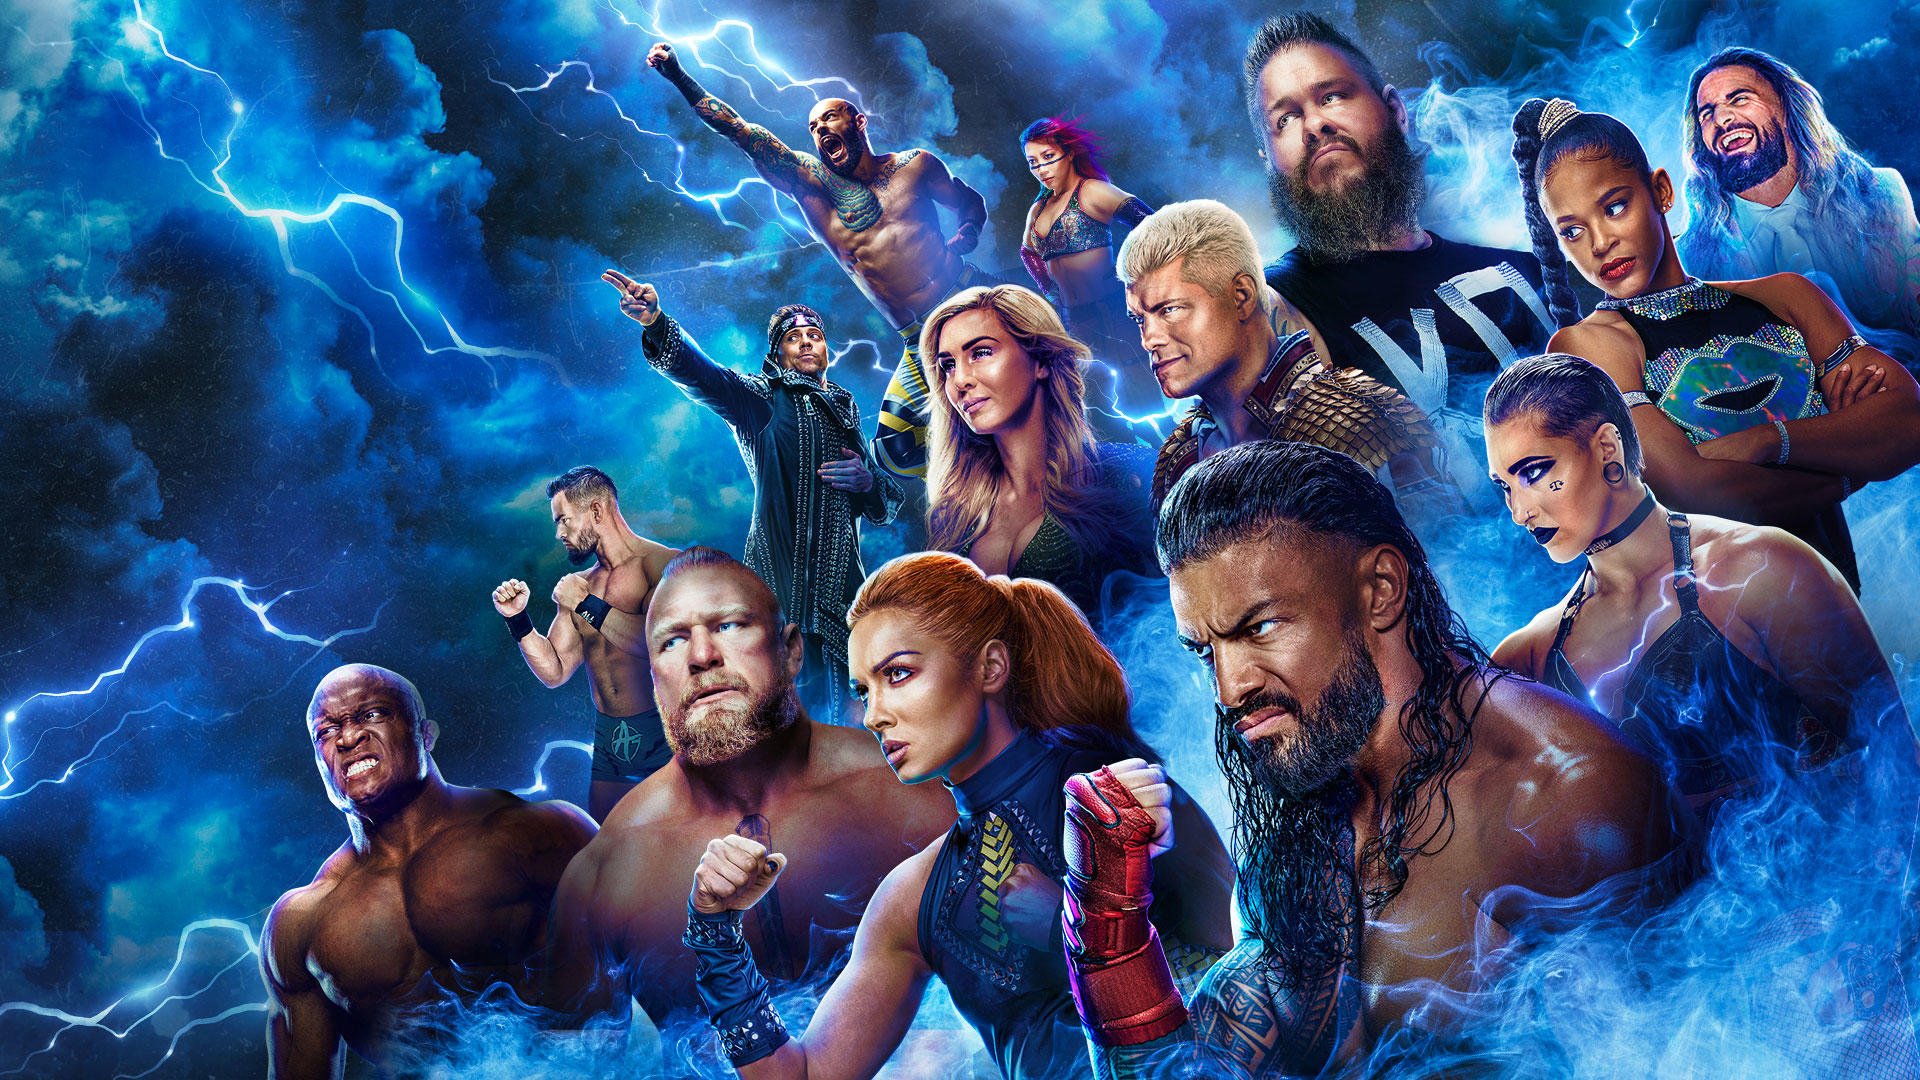 WWE Royal Rumble 2023 Schedule, Date, Venue, Updates, Betting Odds and more